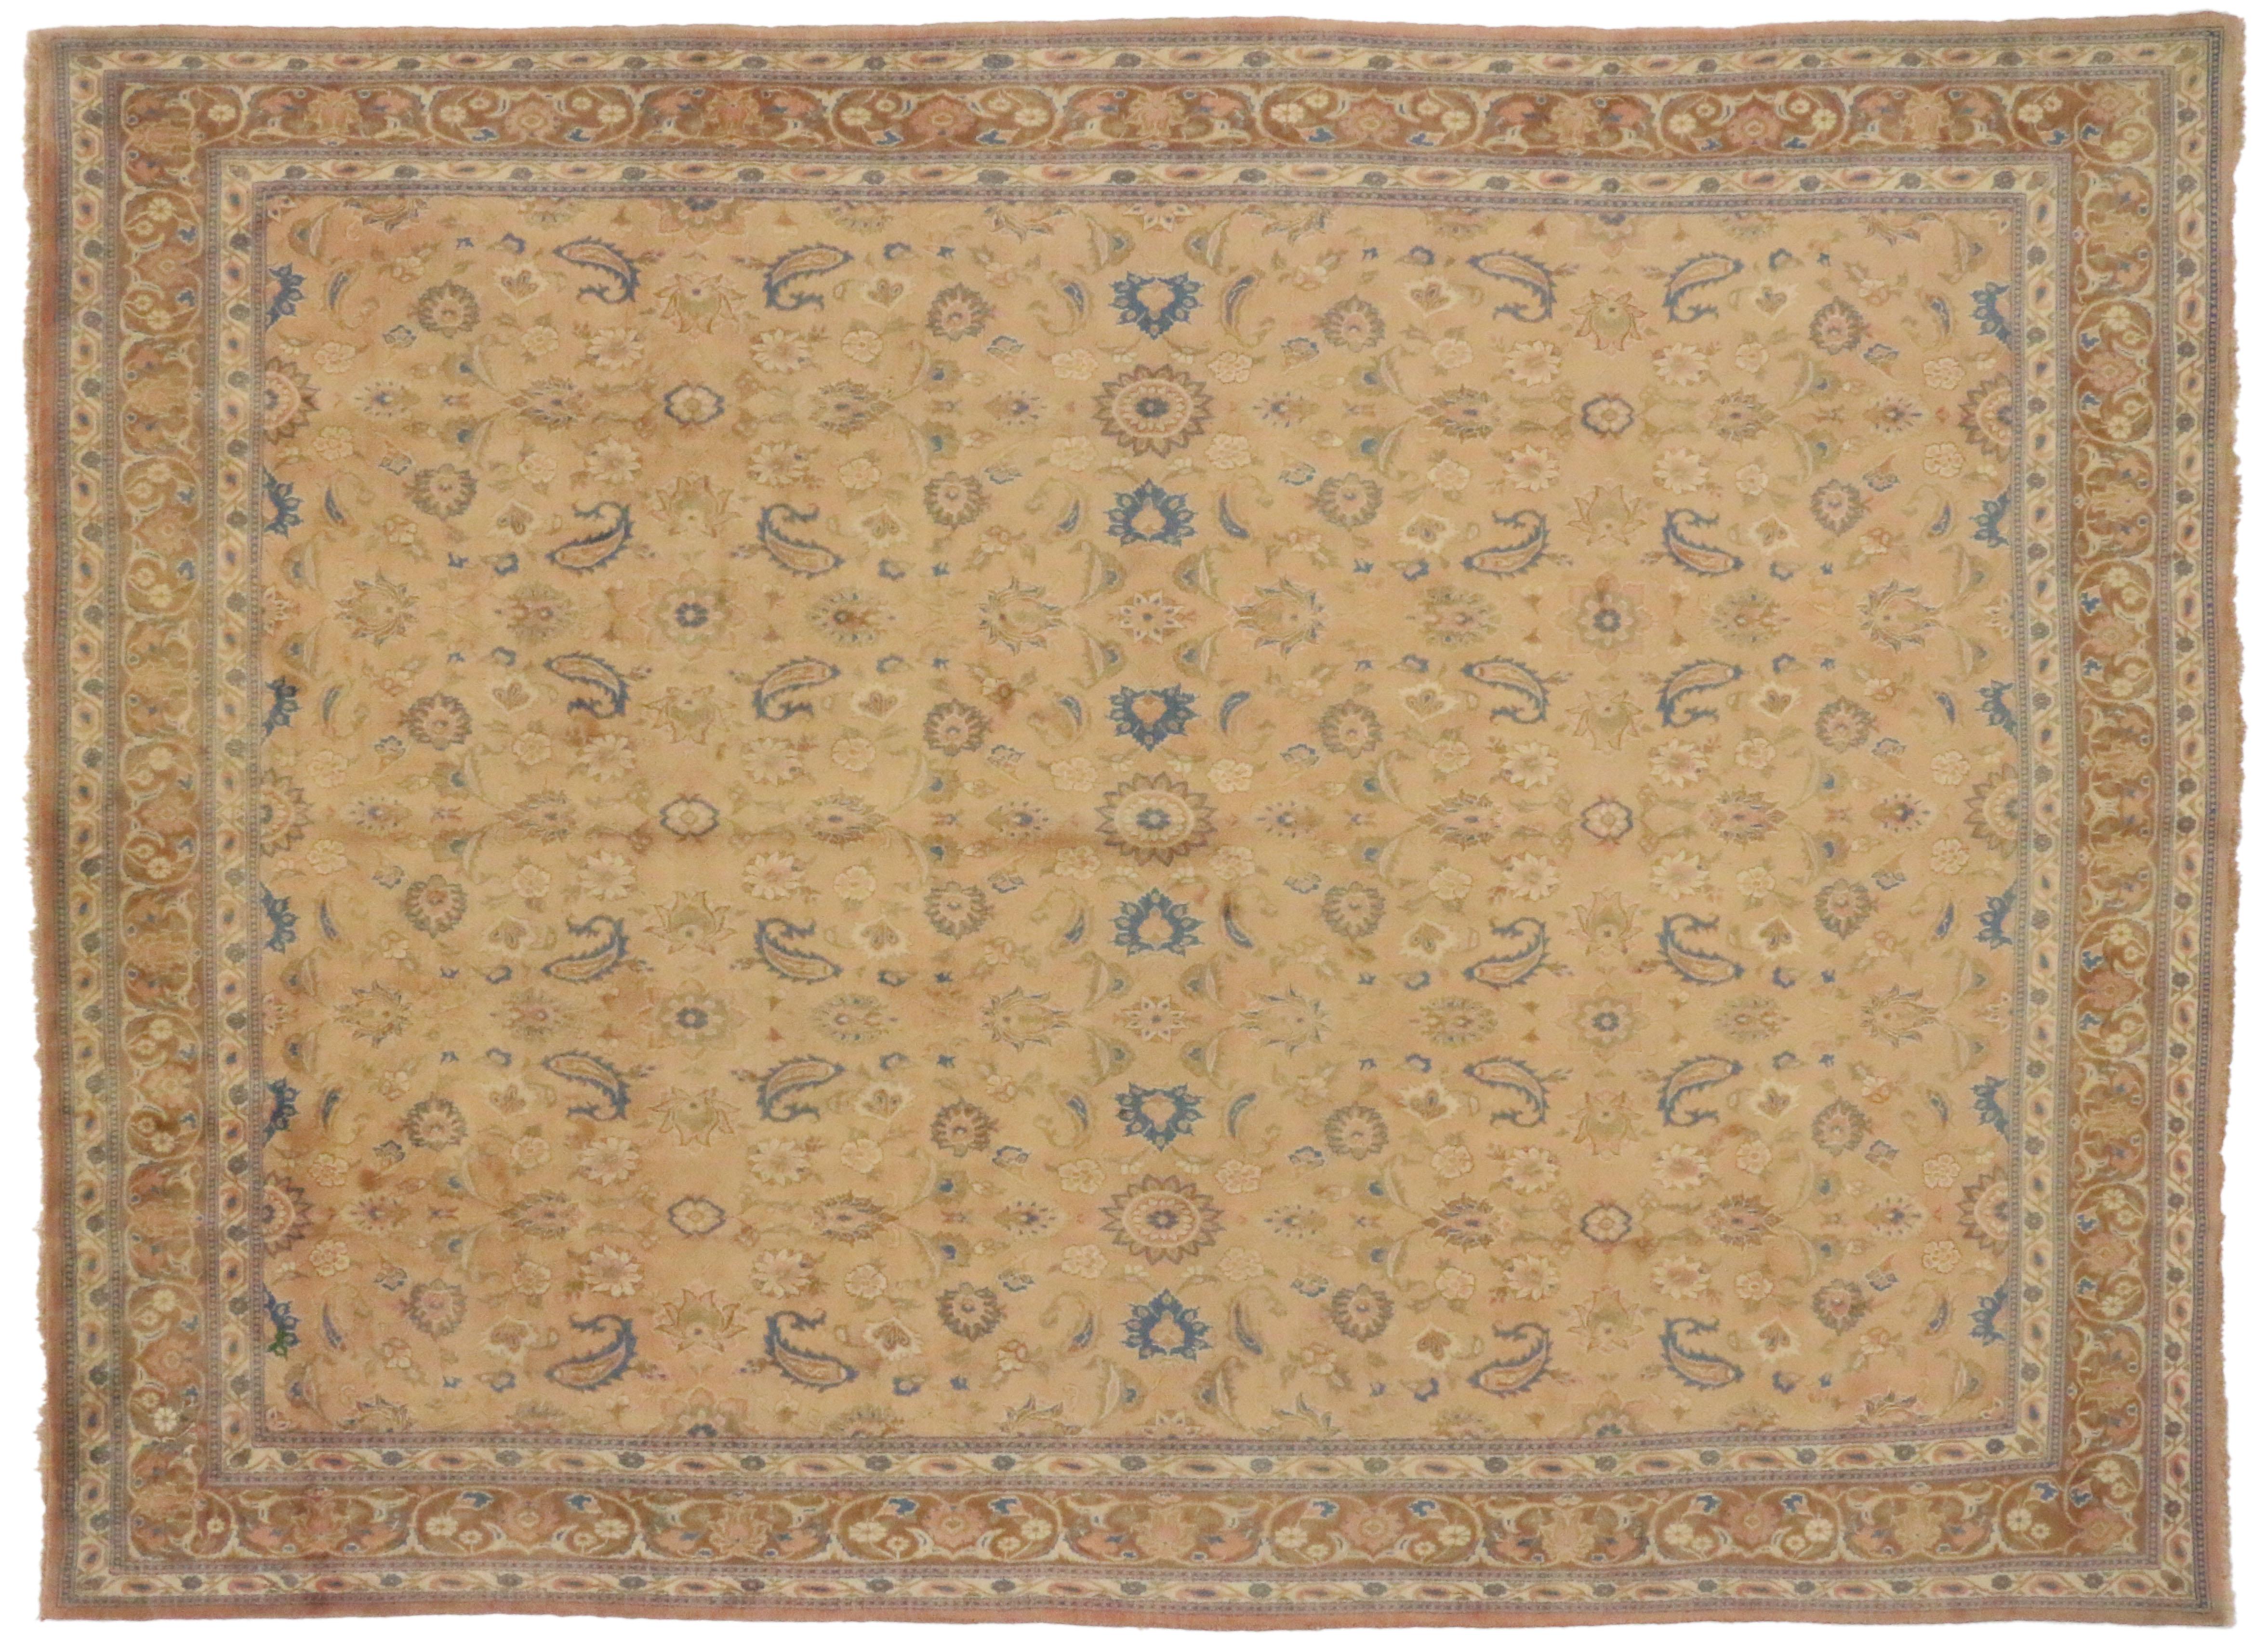 75530 Vintage Persian Mashhad Area Rug with Rustic Georgian Style. This hand-knotted wool vintage Persian Mashhad area rug features an all-over floral pattern composed of palmettes and botehs spread across an abrashed rust colored field. It is